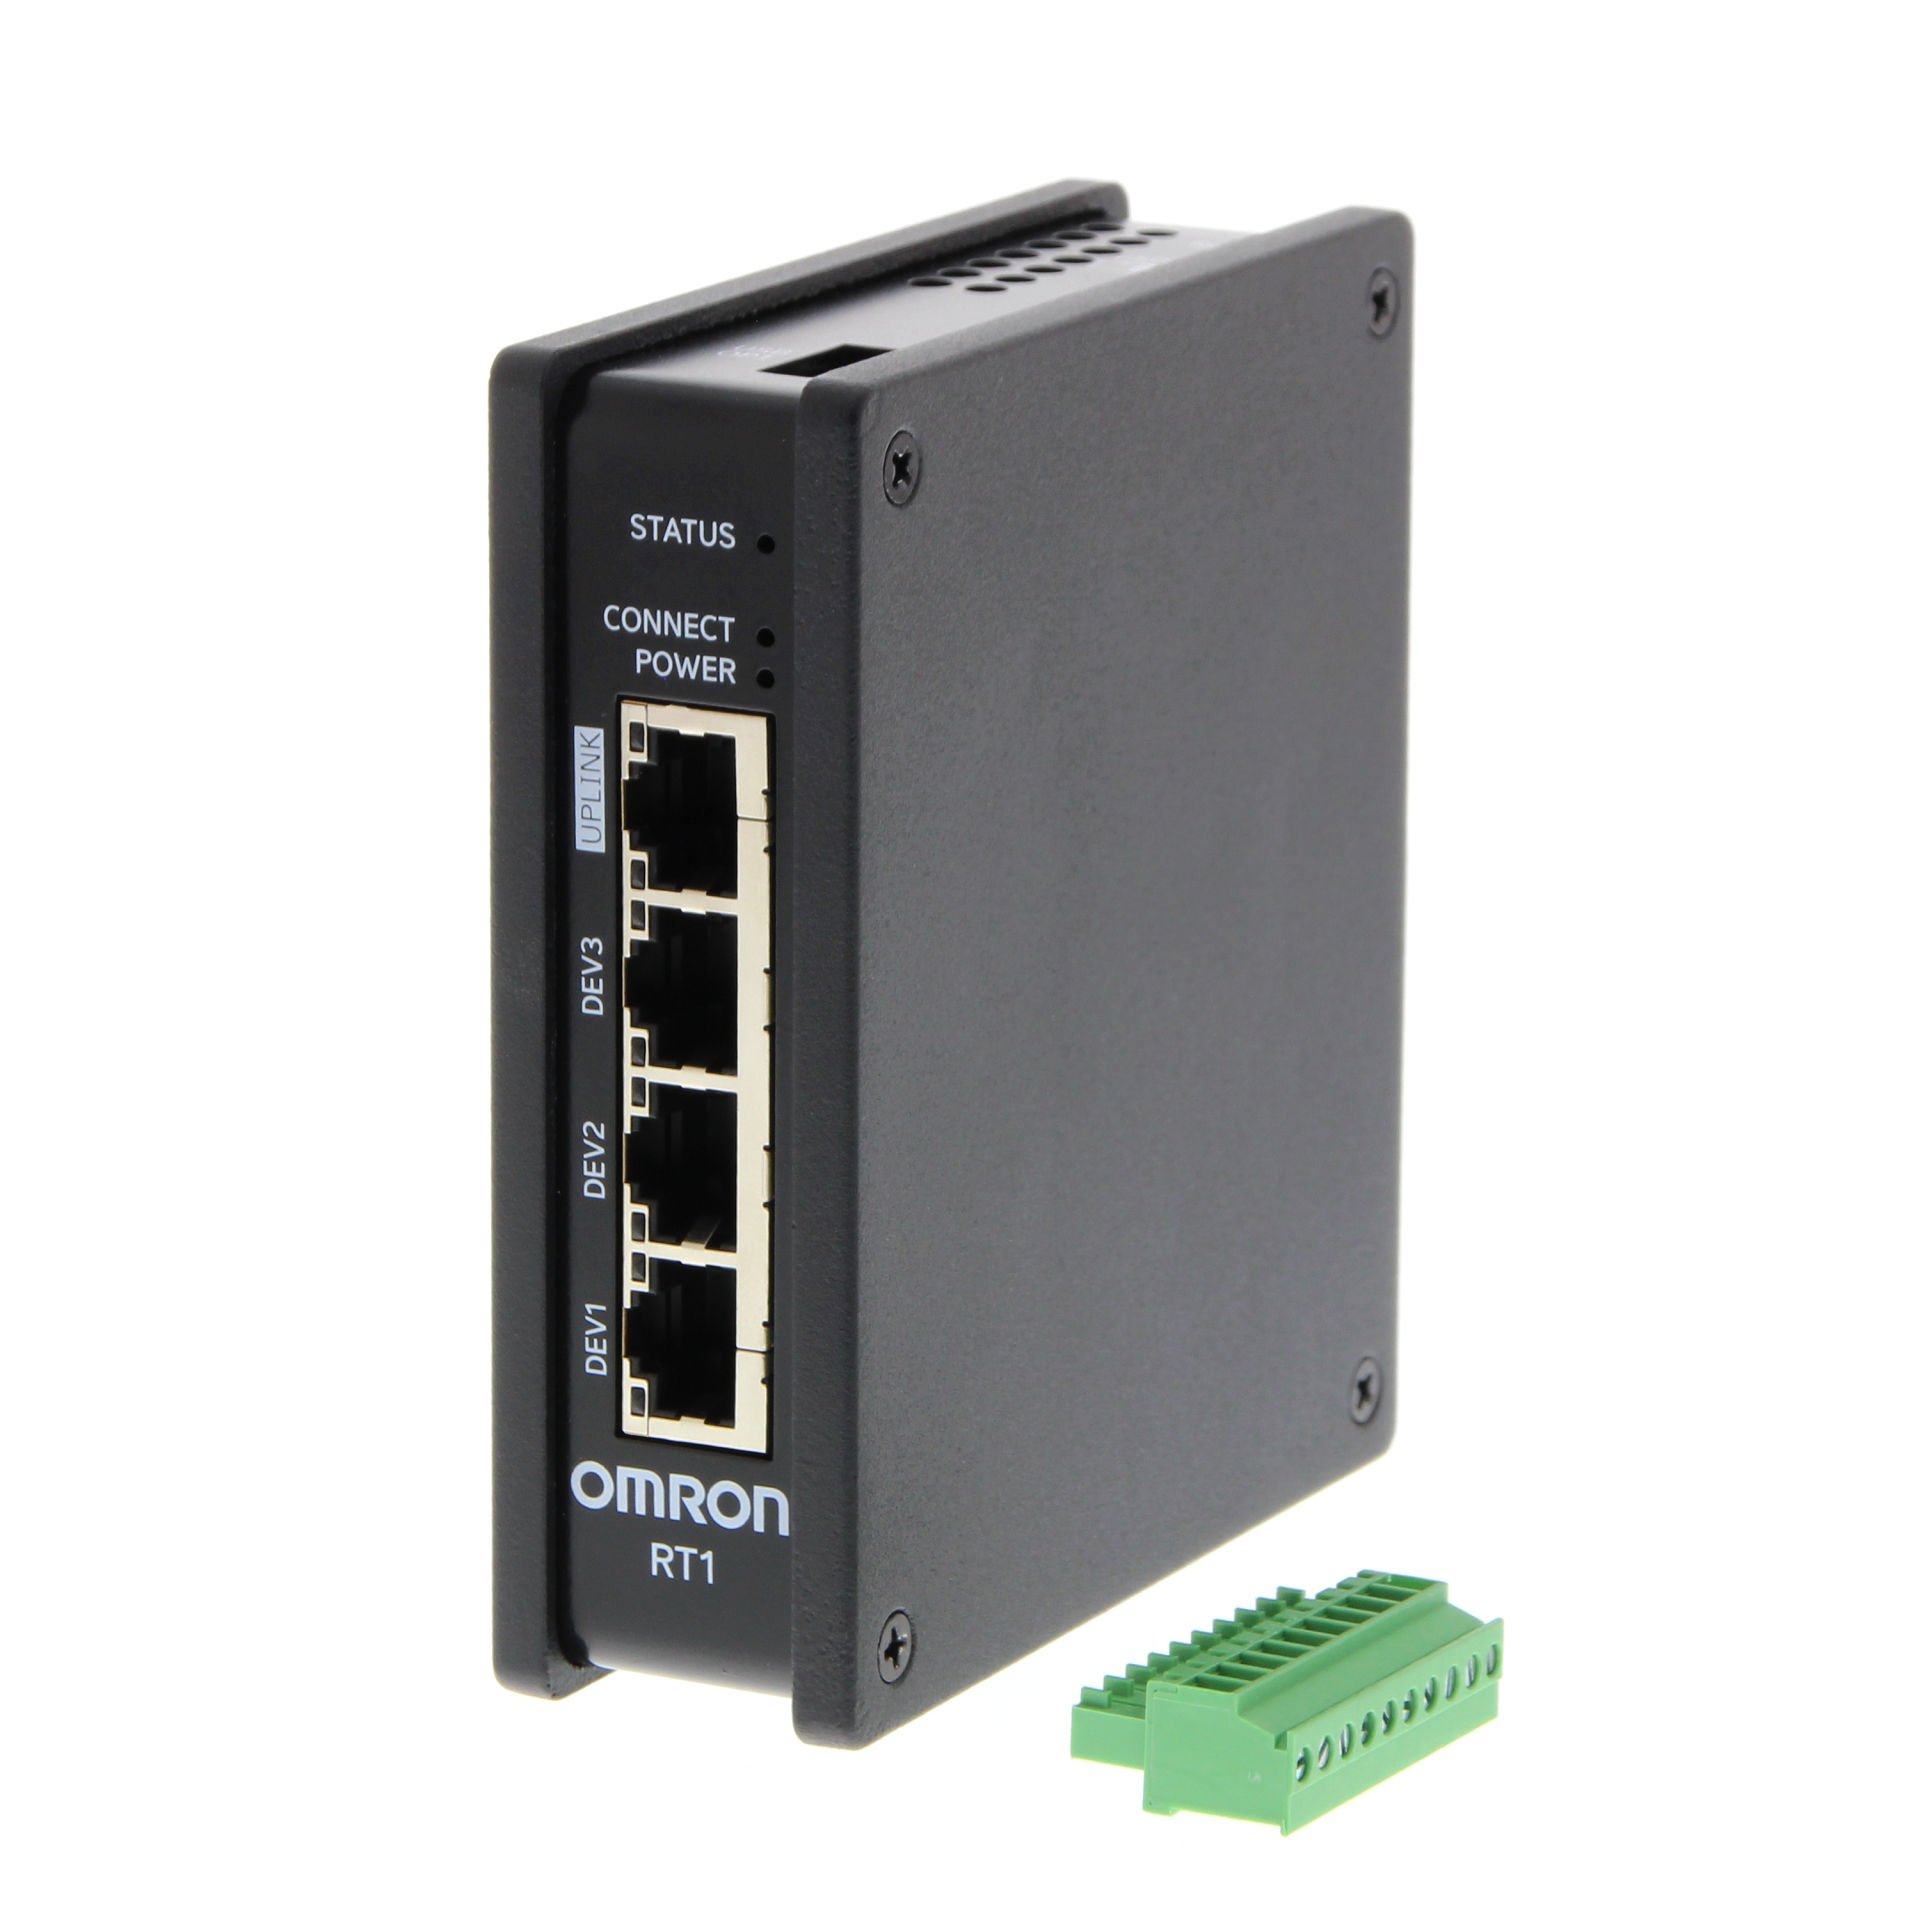 Omron - RT100-EMM3010  RT1-series SiteManager LAN, 10 Device Agents, 3x Ethernet Ports, 1x Micro SD slot, 1x USB port